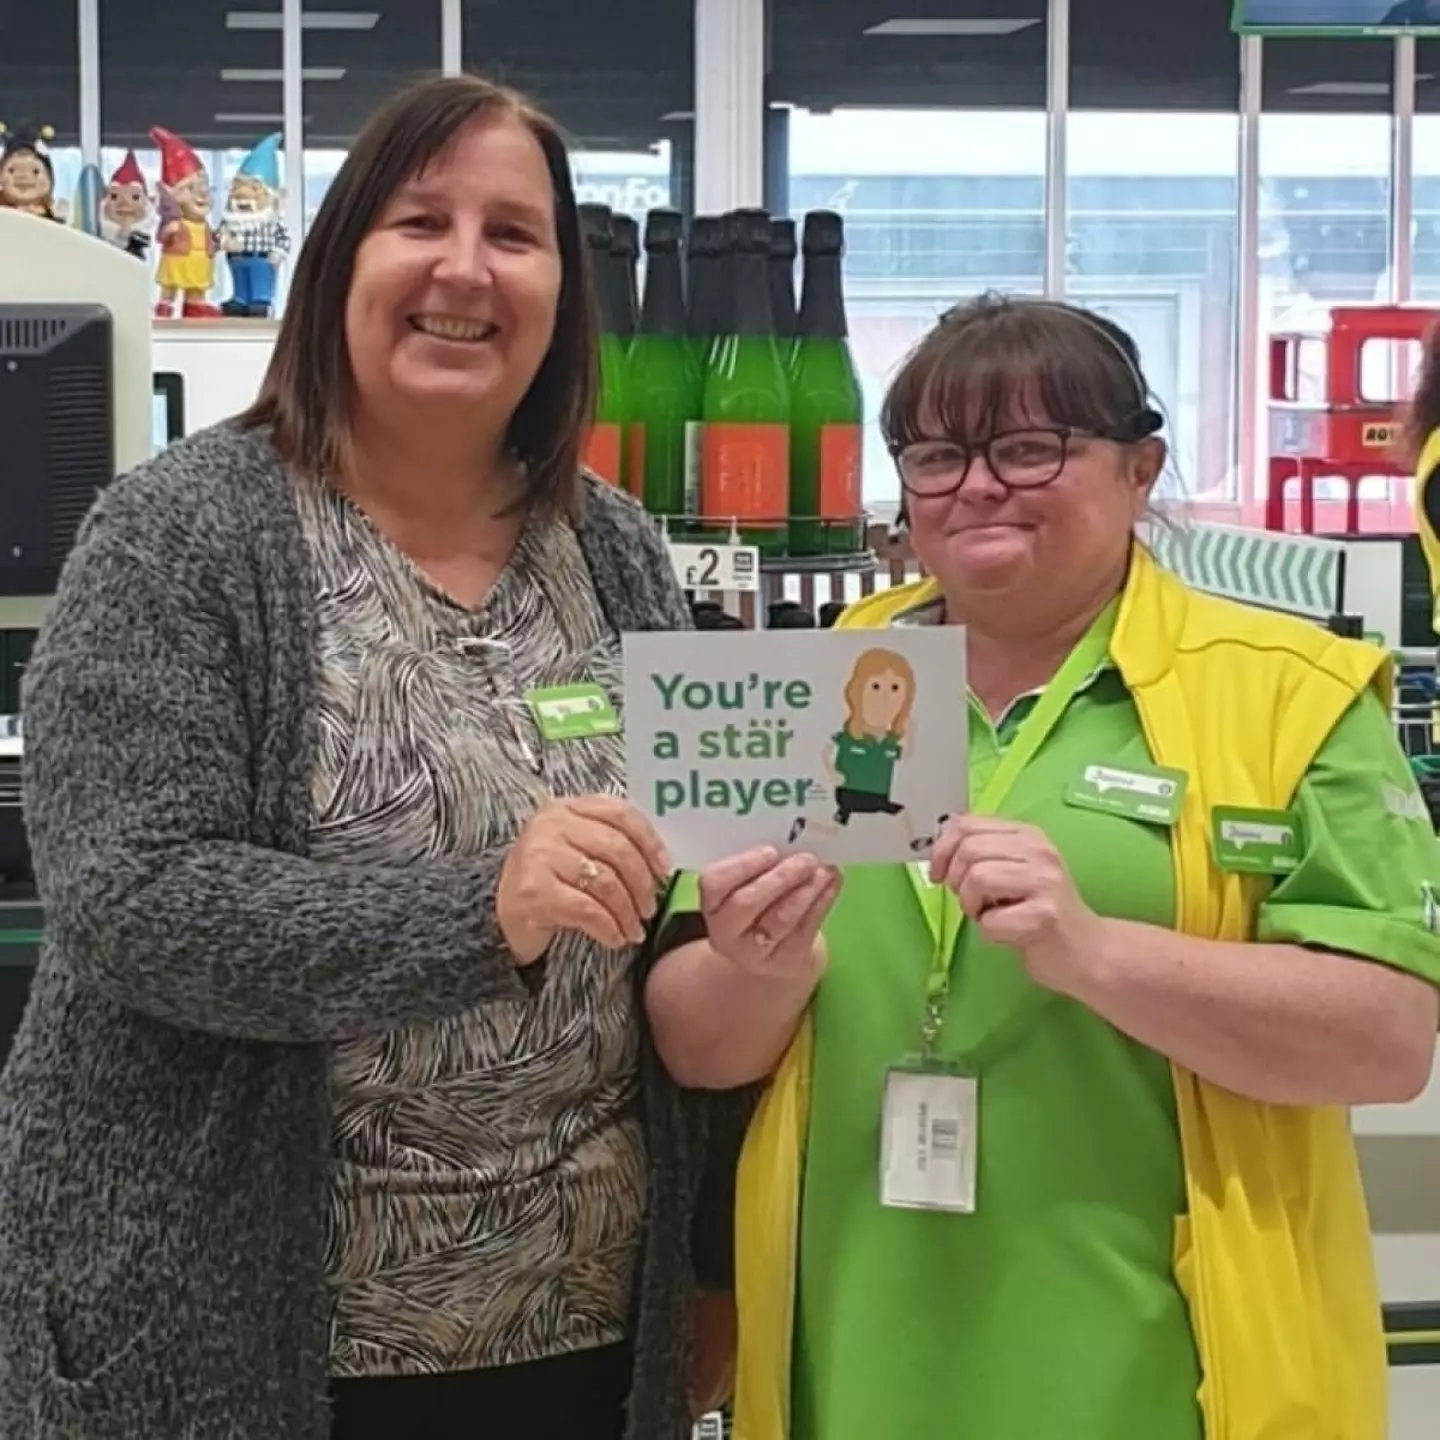 Joanne has since been nominated for an Asda service superstar award.